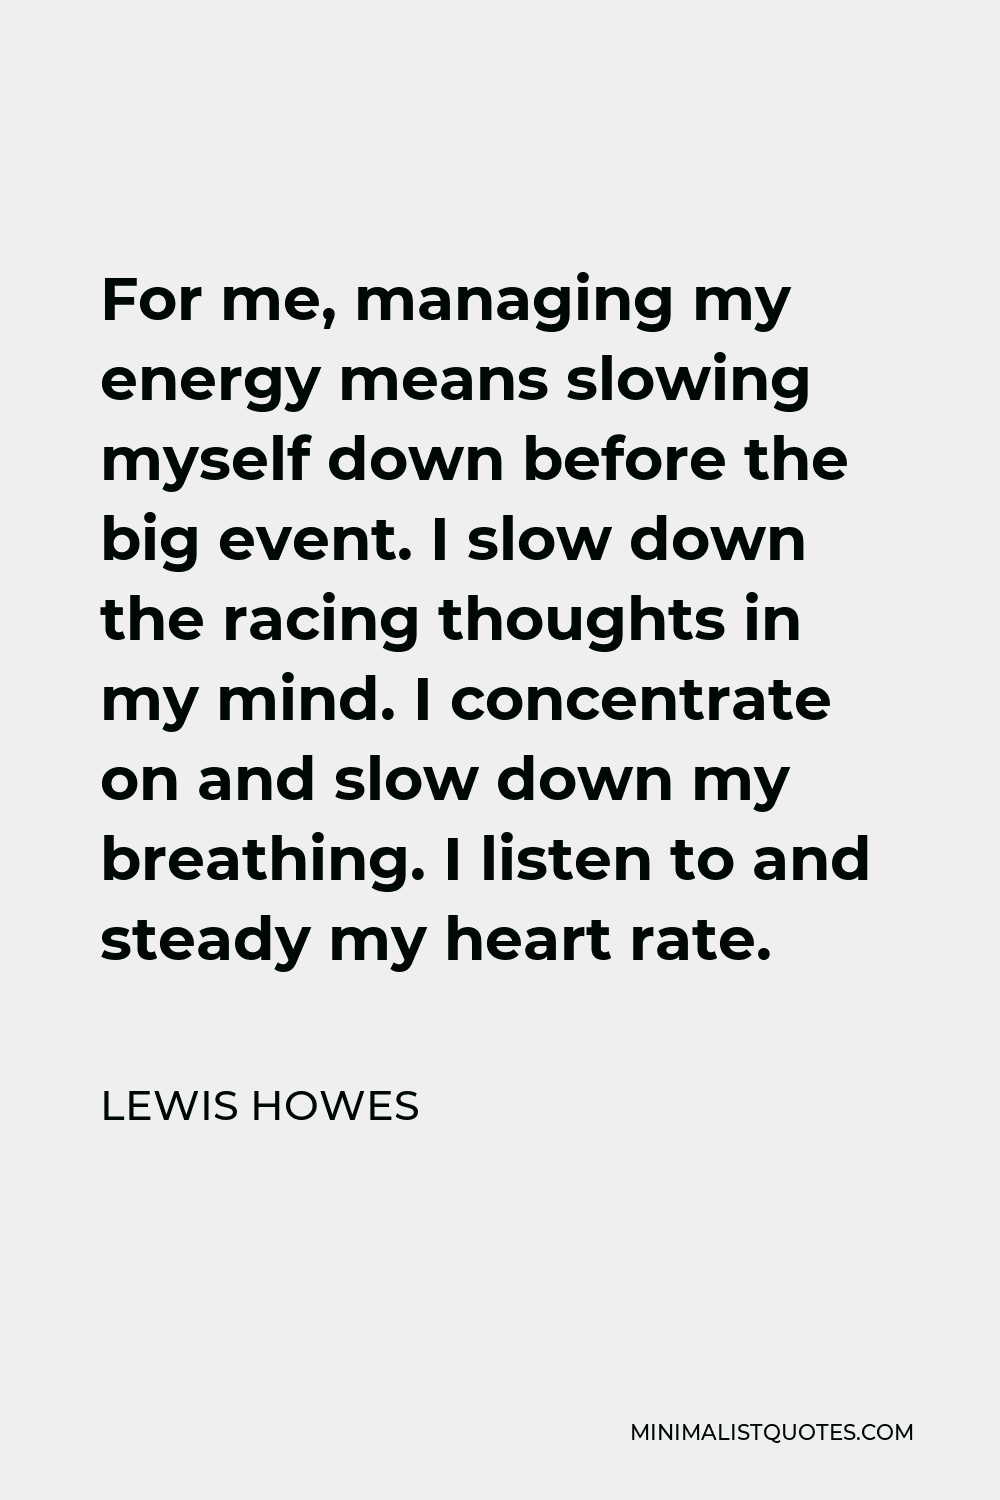 Lewis Howes Quote - For me, managing my energy means slowing myself down before the big event. I slow down the racing thoughts in my mind. I concentrate on and slow down my breathing. I listen to and steady my heart rate.